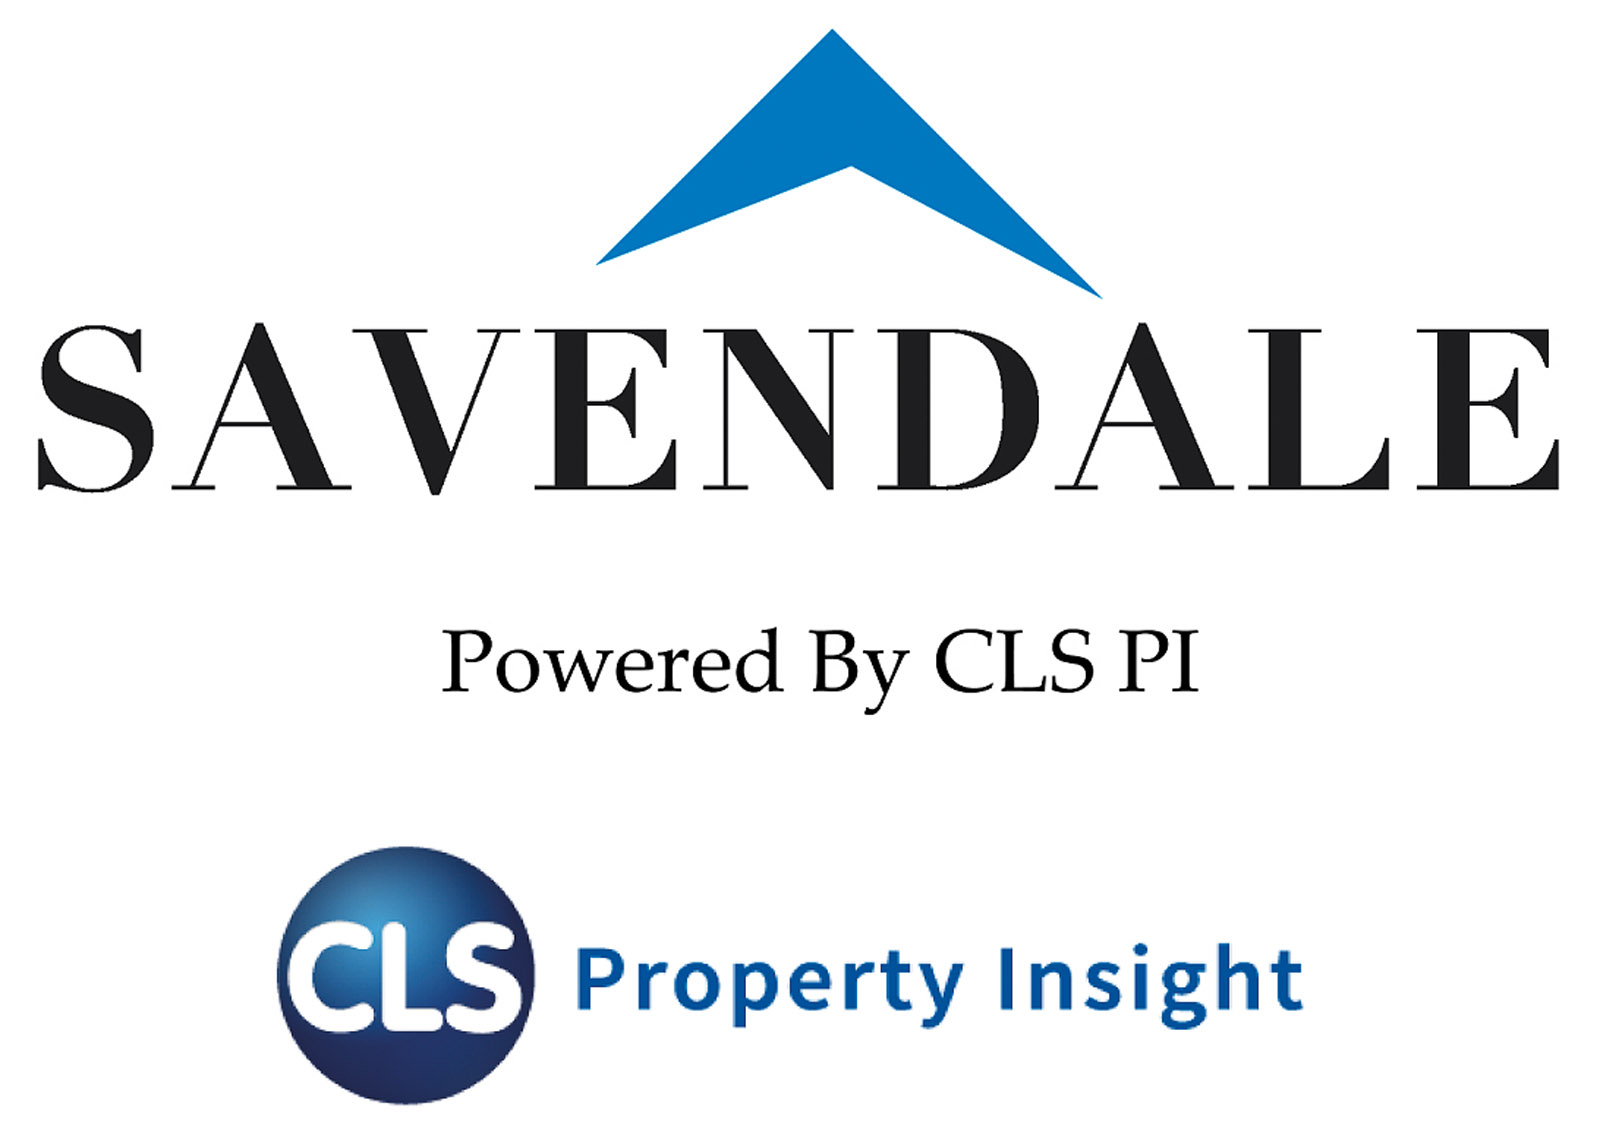 Savendale - Powered by CLS PI (logo)